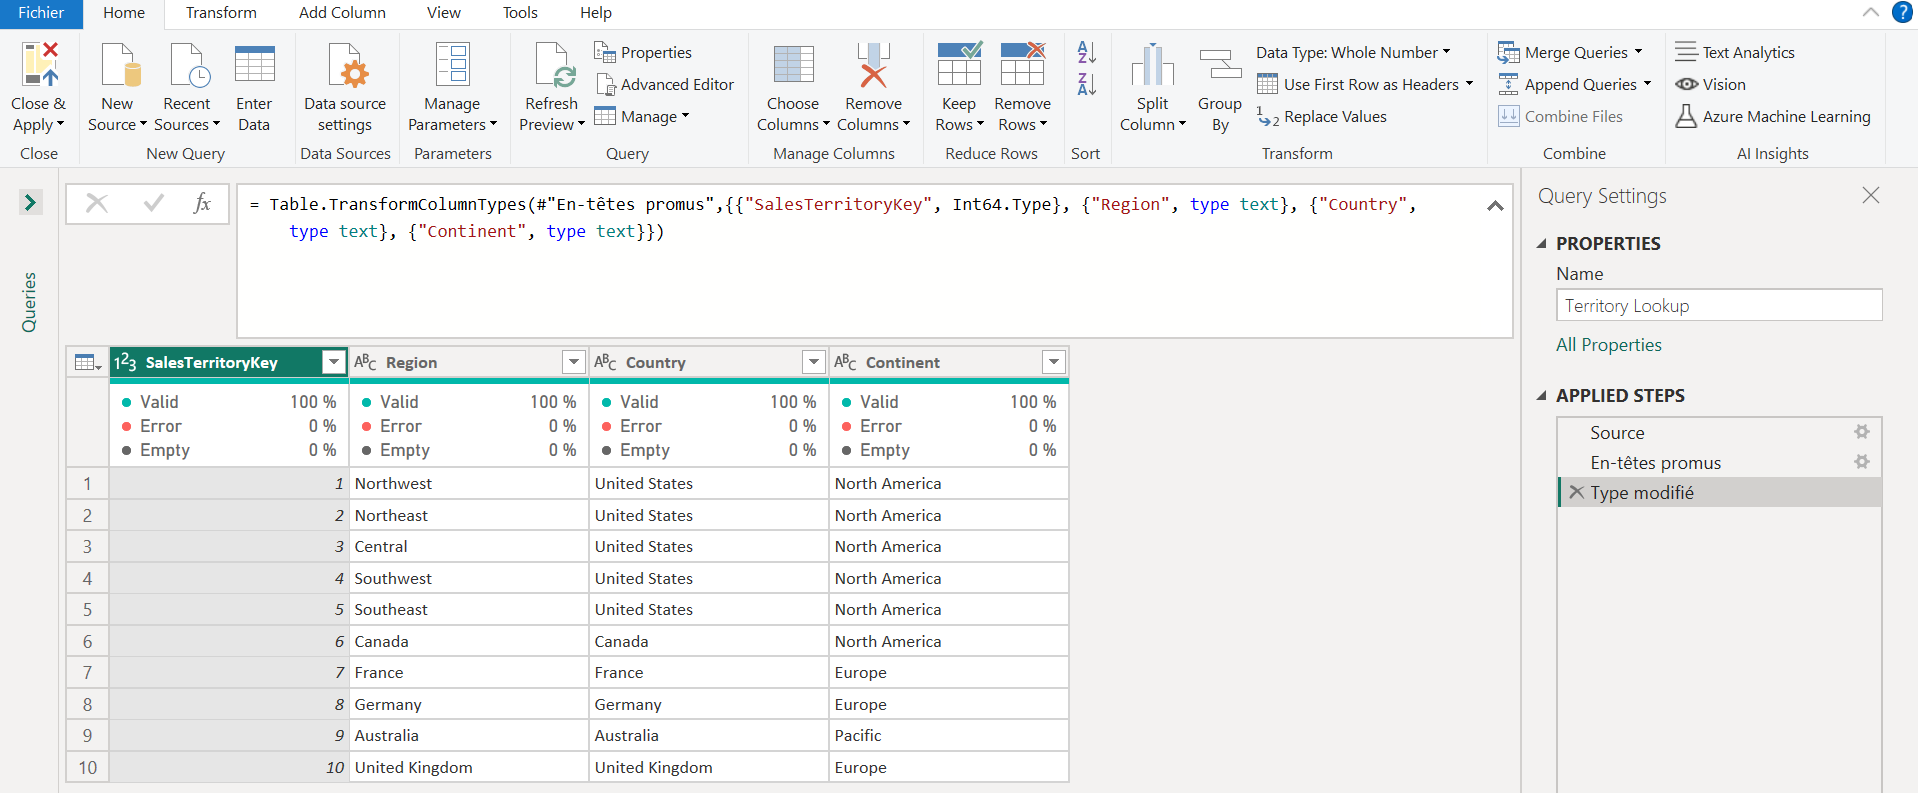 Advantages of the import functionality for power query transformations